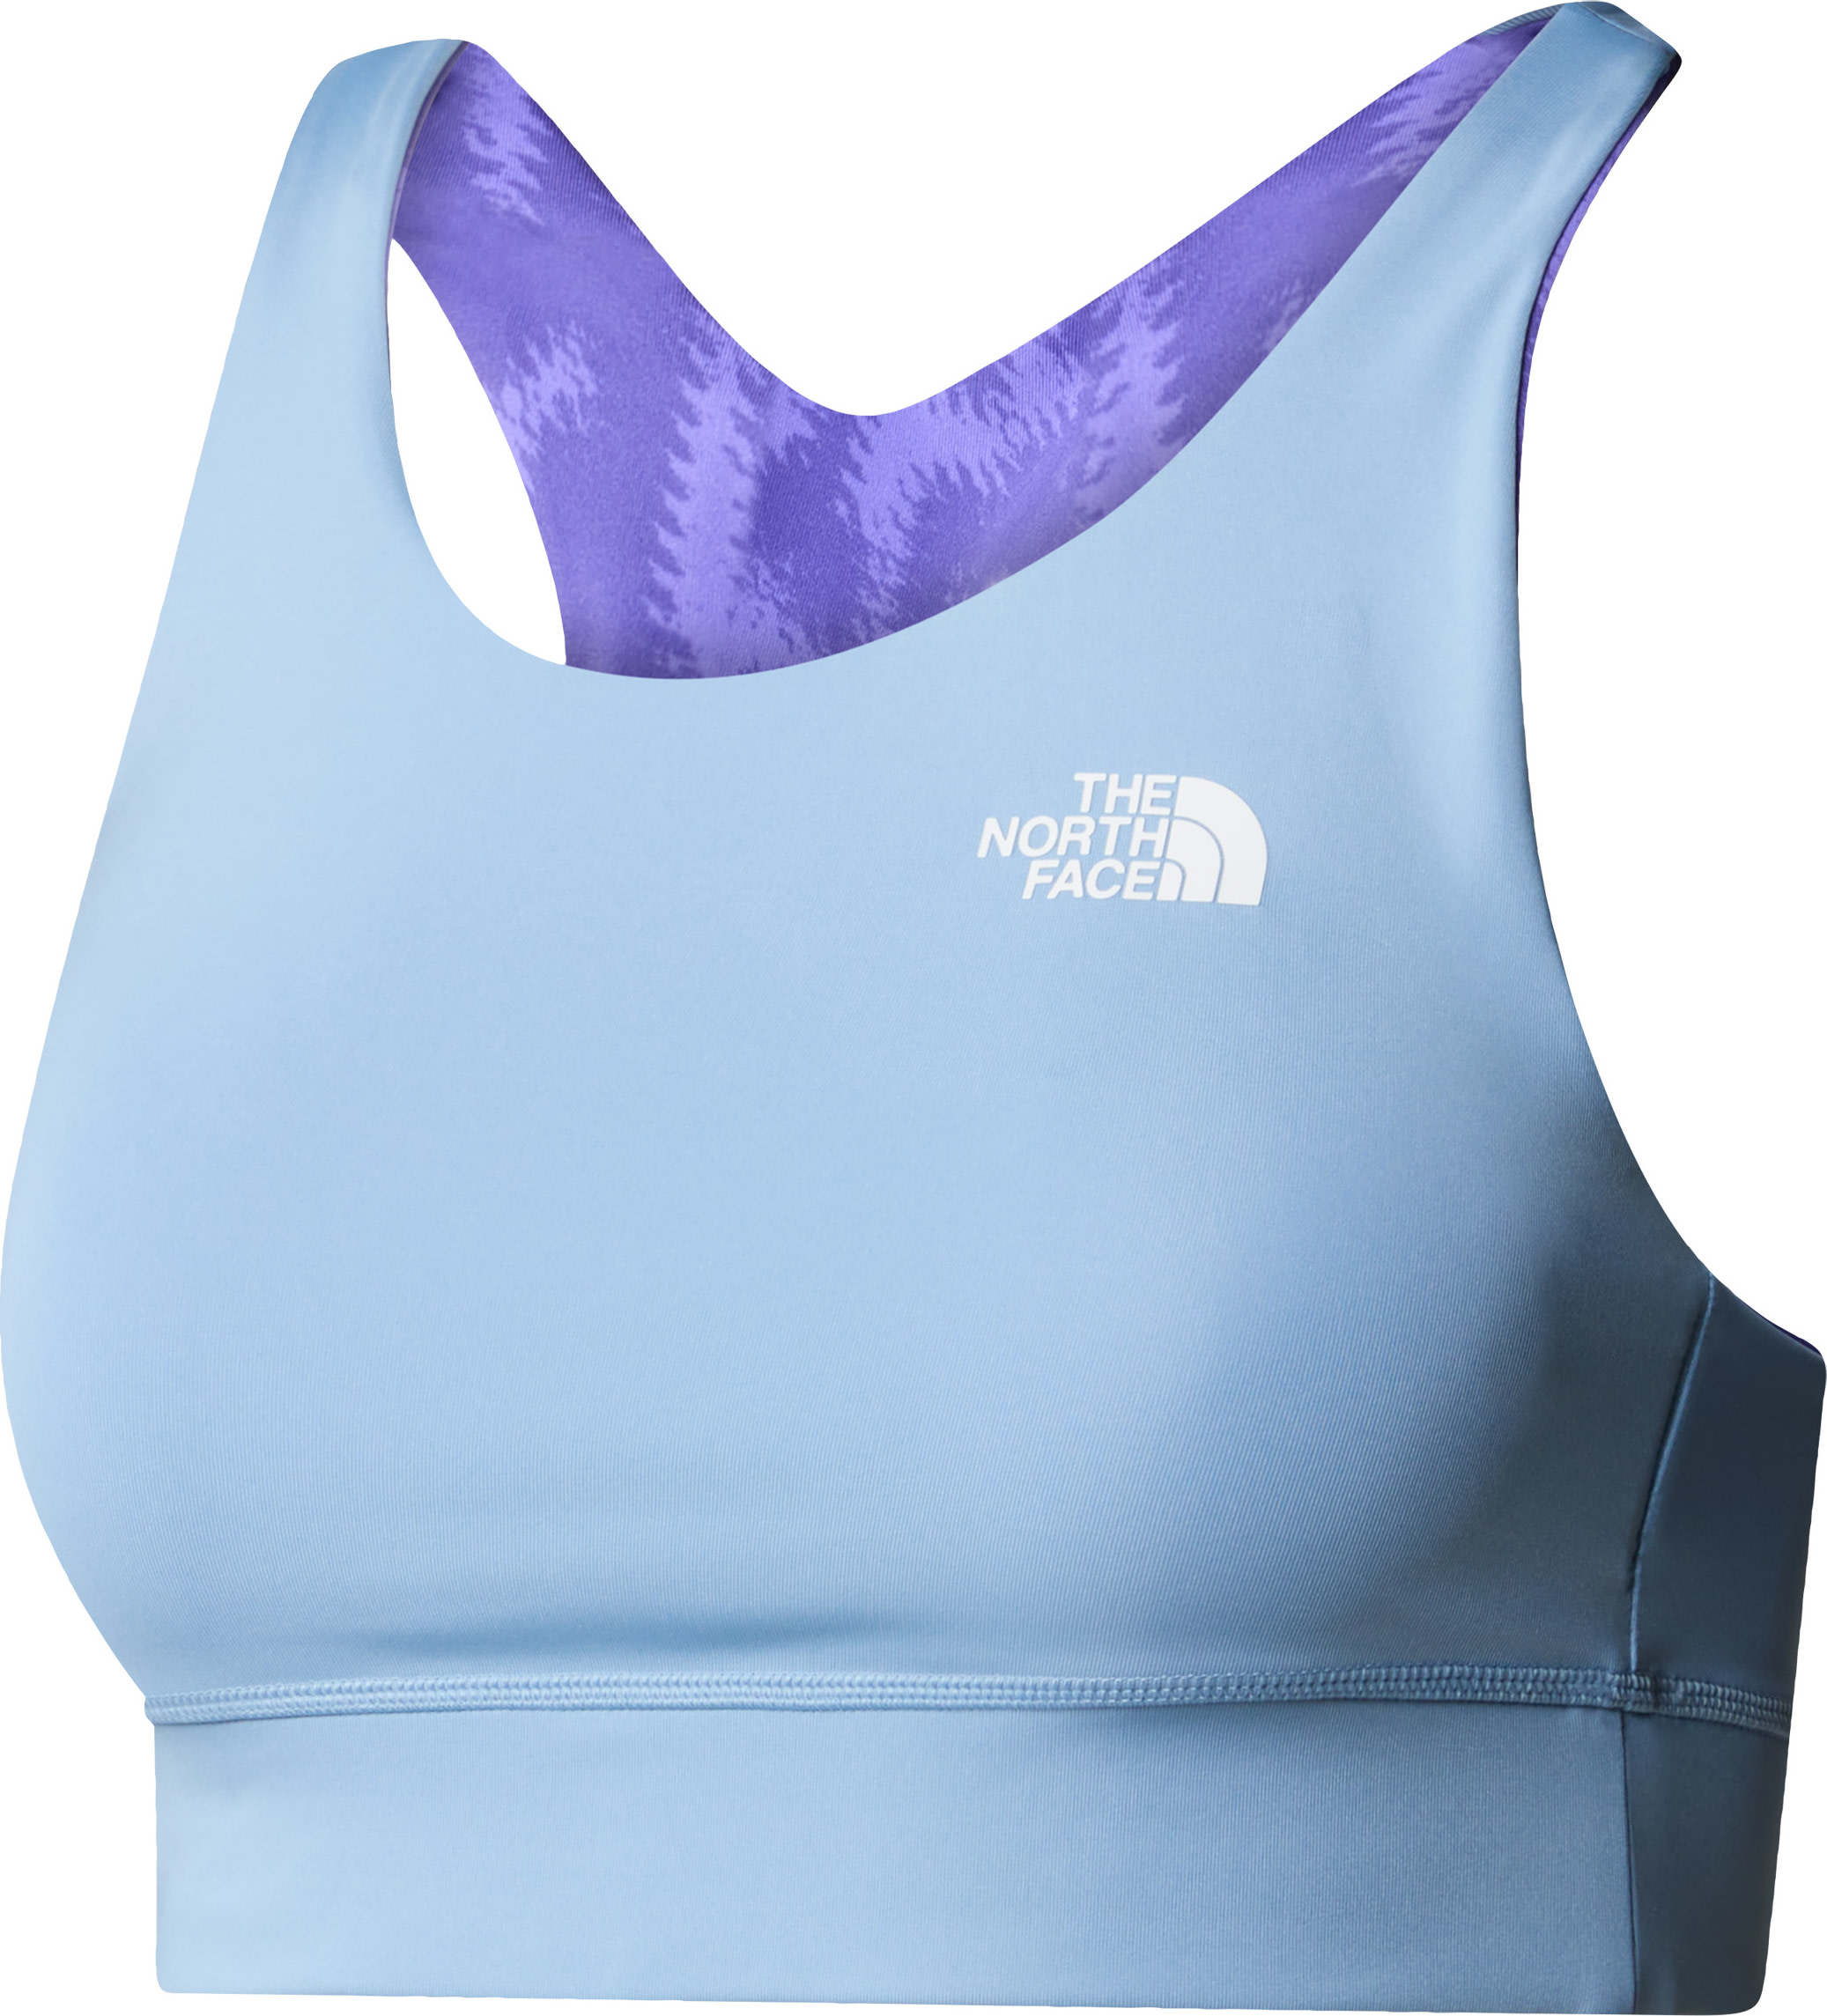 The North Face Women’s Flex Printed Bra Optic Violet Abstract P